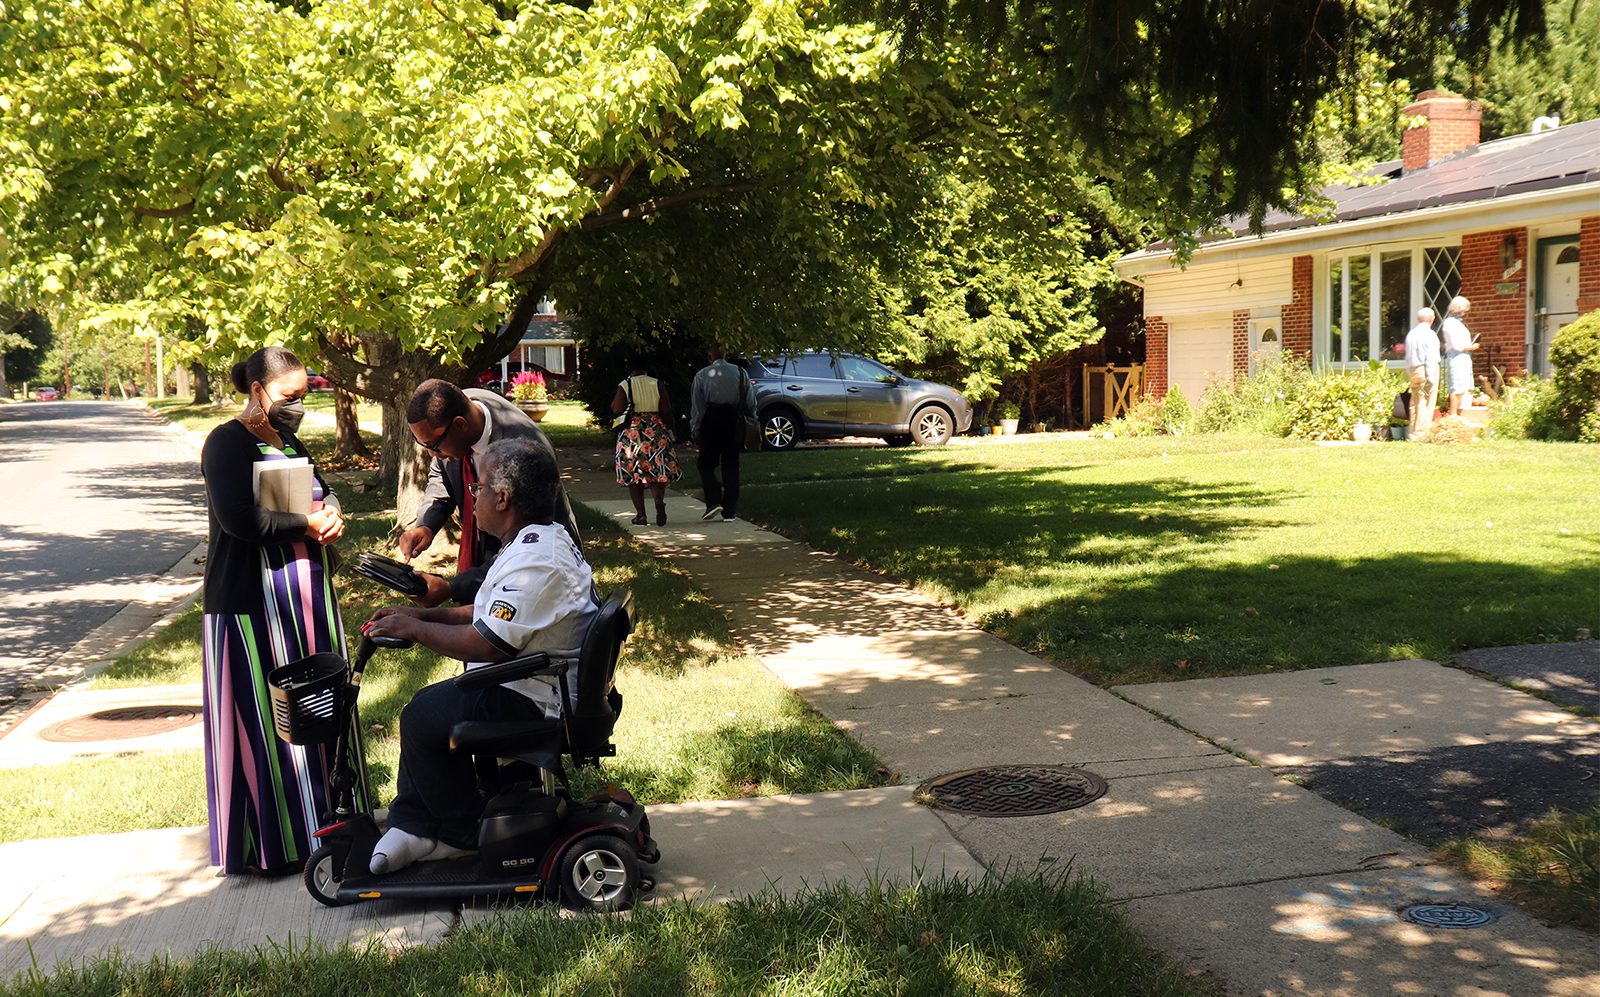 Tameka and Limmel Richardson, of Silver Spring, Maryland, speak with resident Charles Ogwo, seated, as other Jehovah’s Witnesses head to nearby houses in the community to knock on doors as they returned to the traditional practice on Thursday, Sept. 1, 2022. RNS photo by Adelle M. Banks